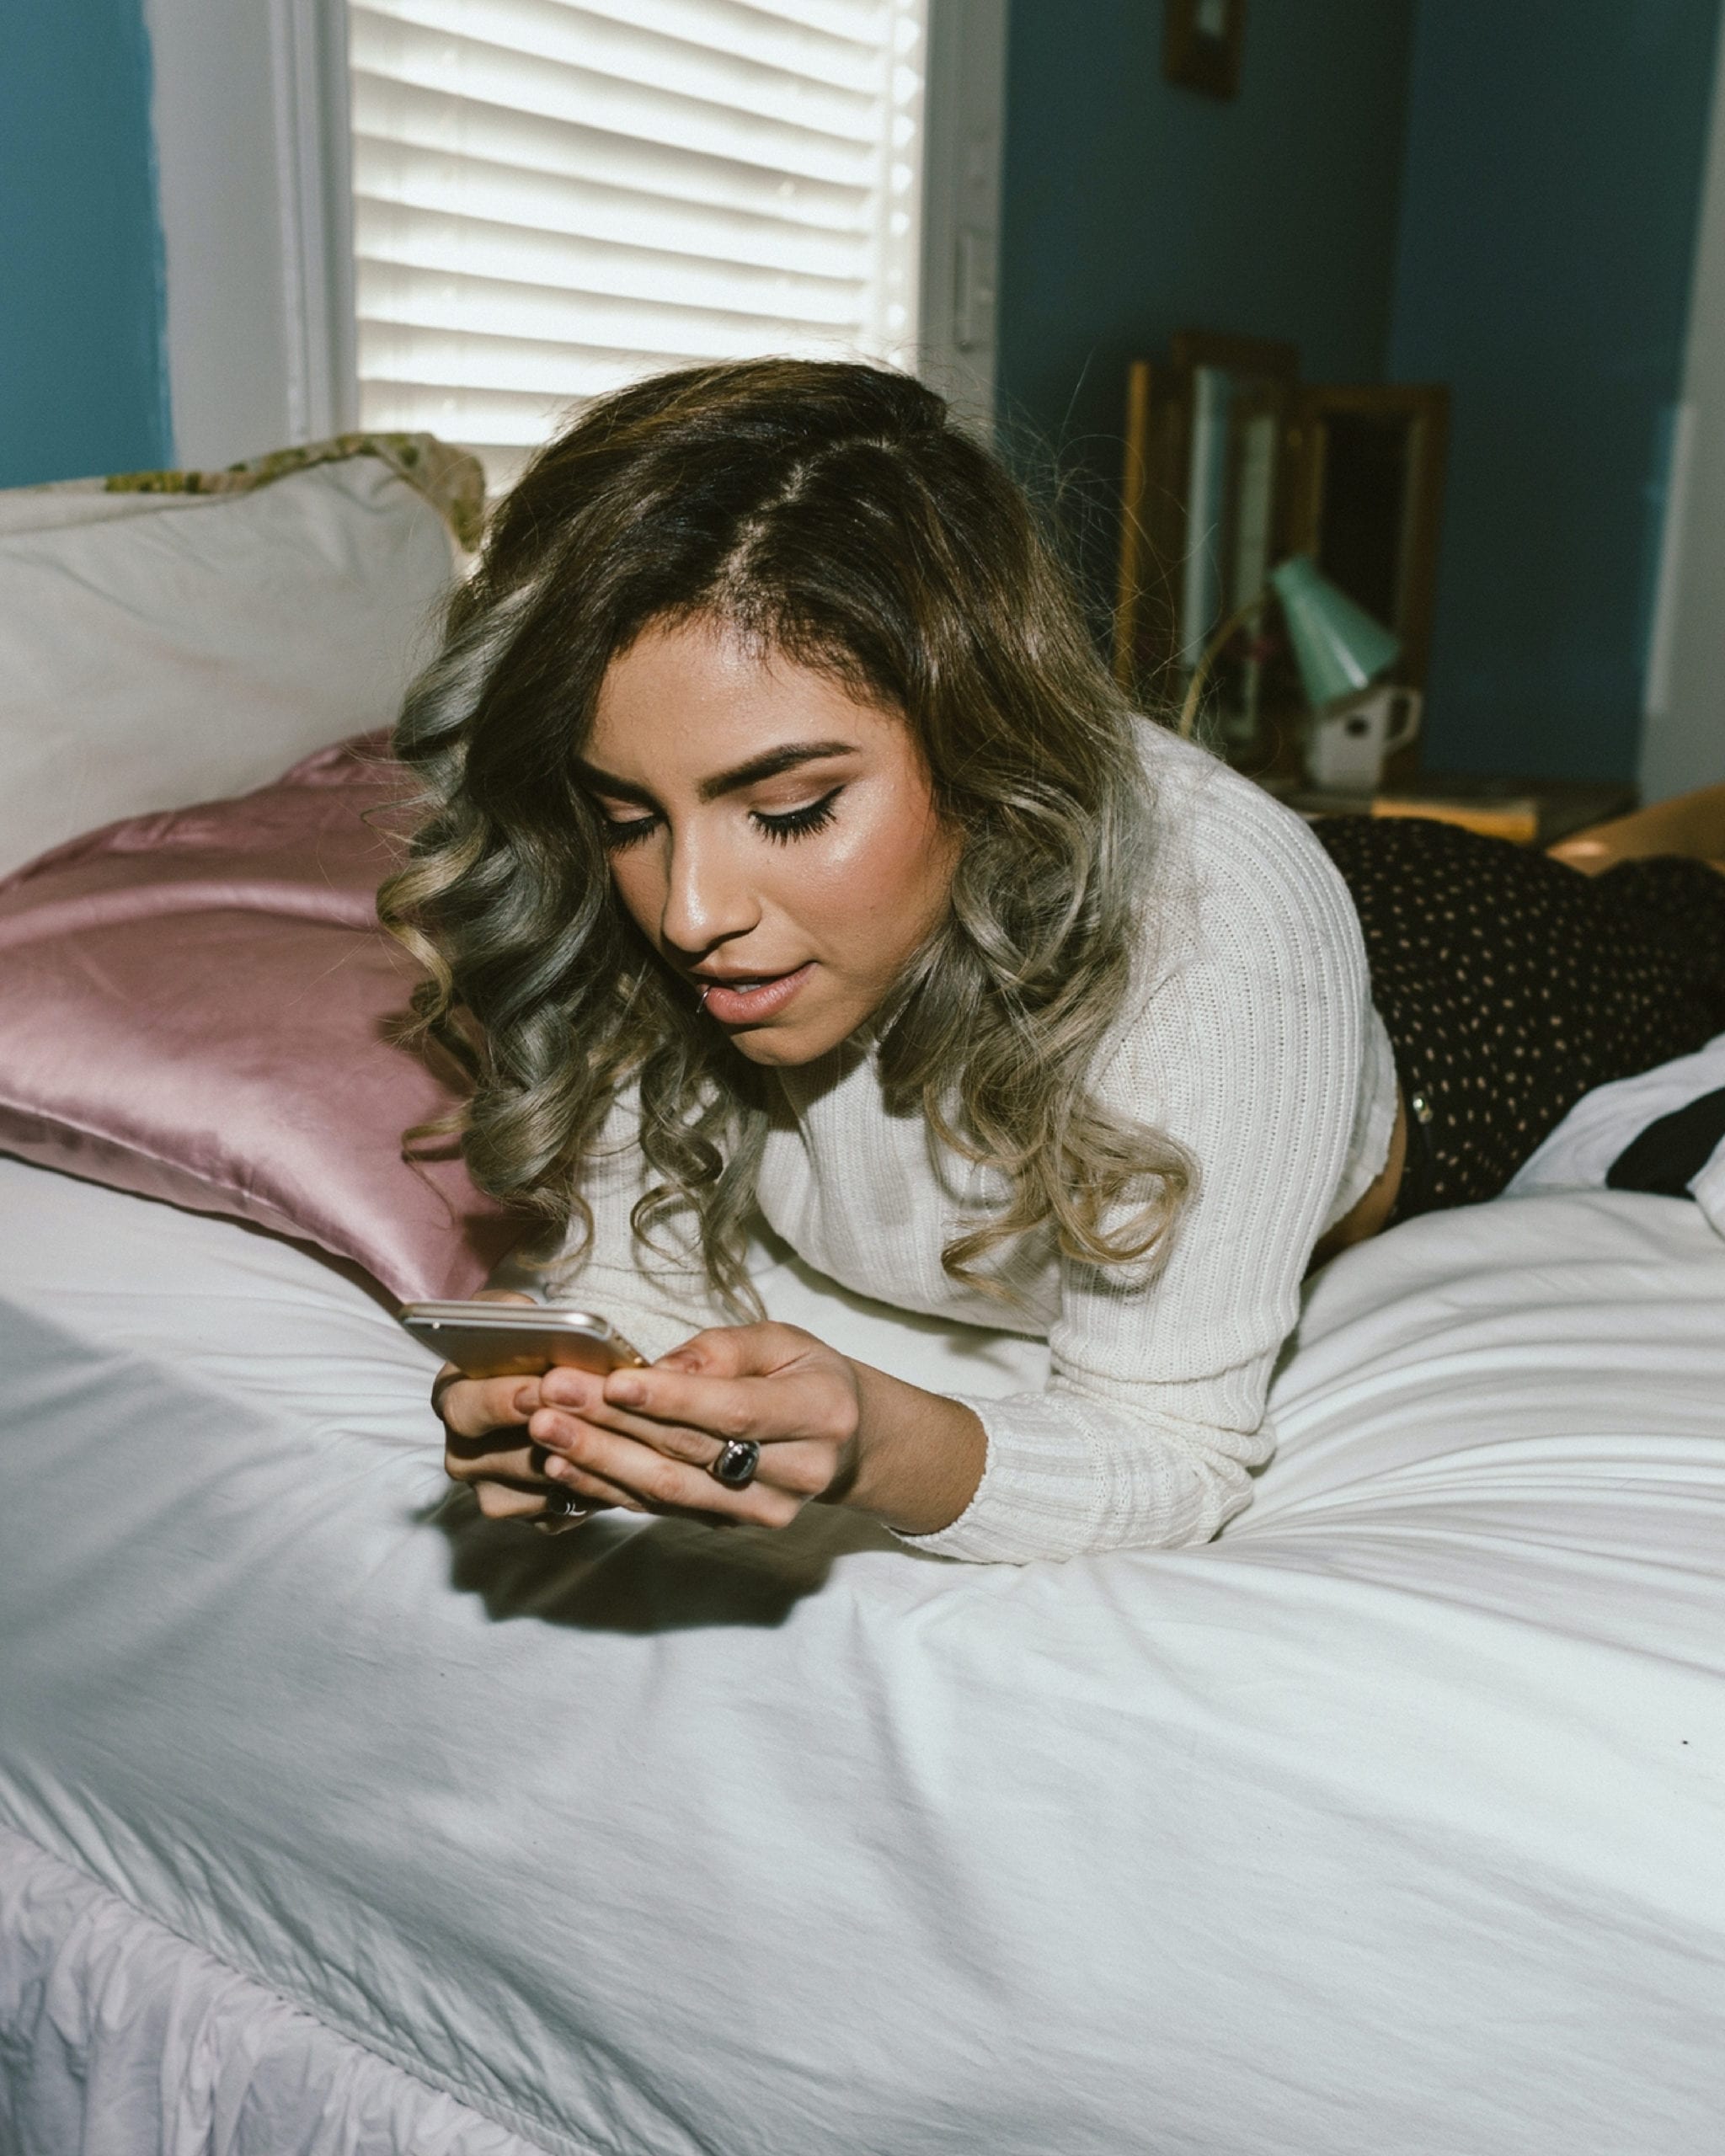 4 actually helpful sexting tips to spice up socially distanced dates